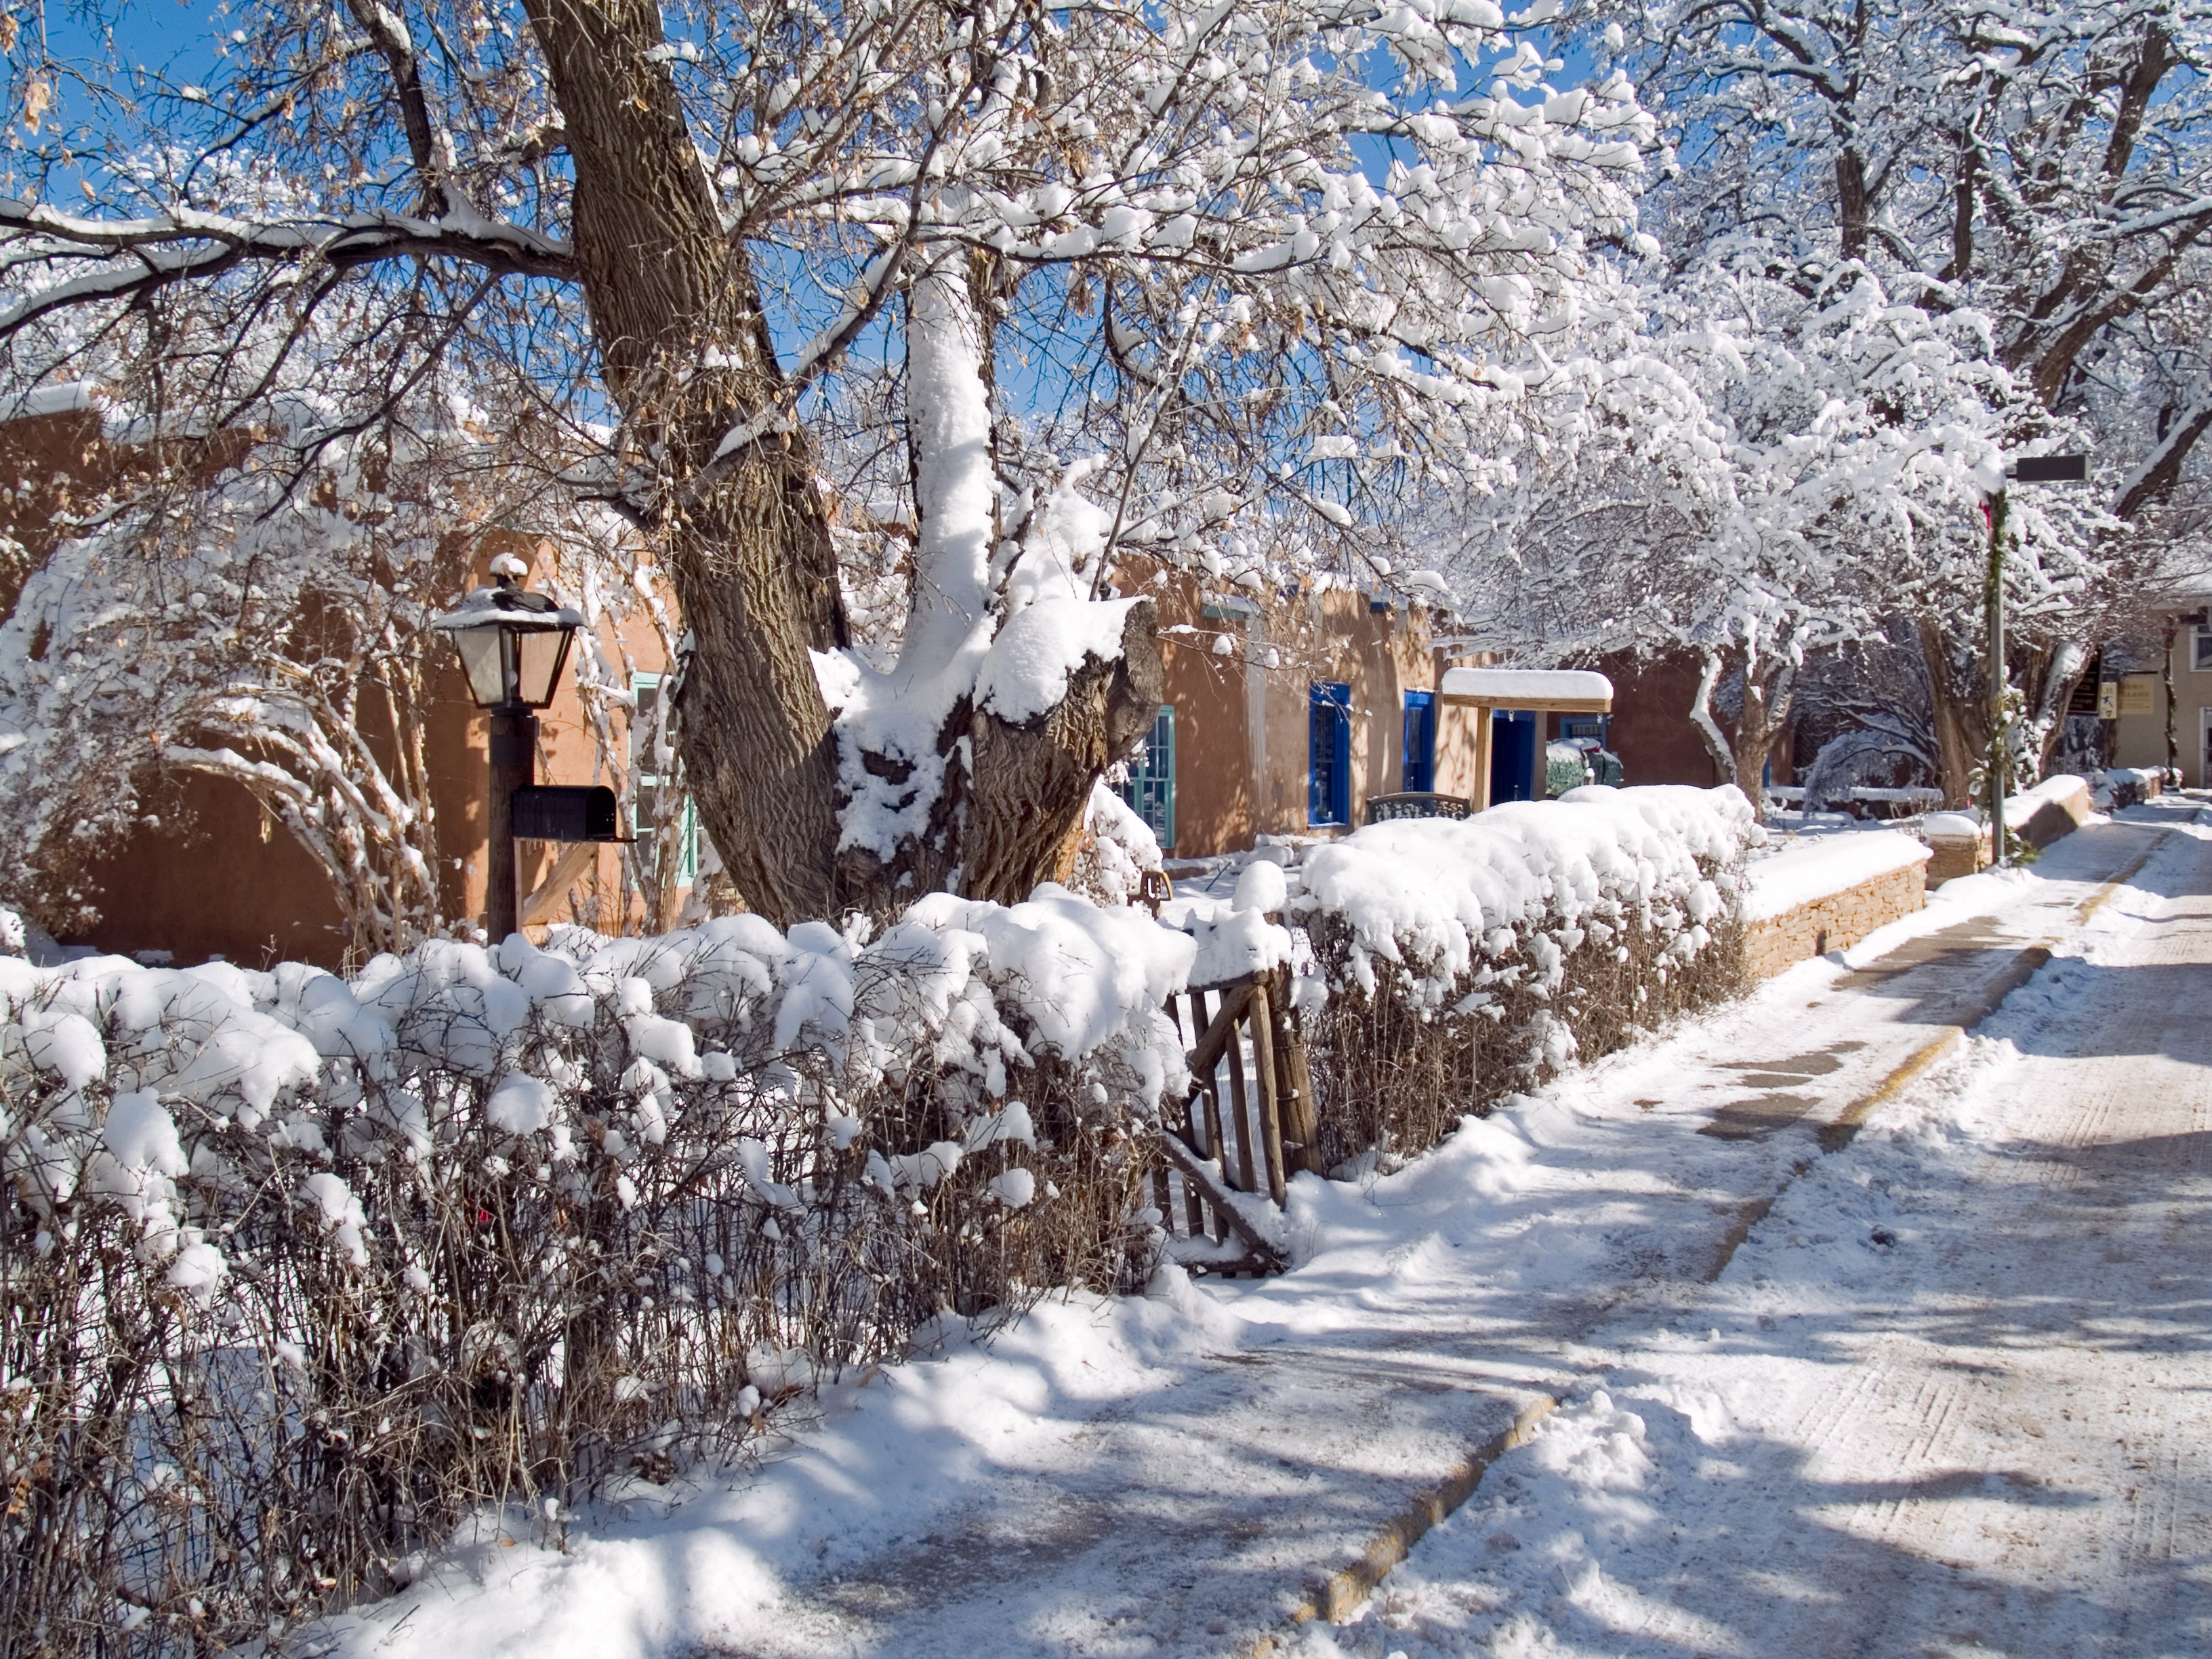 Snow on Bent St. in Taos, New Mexico